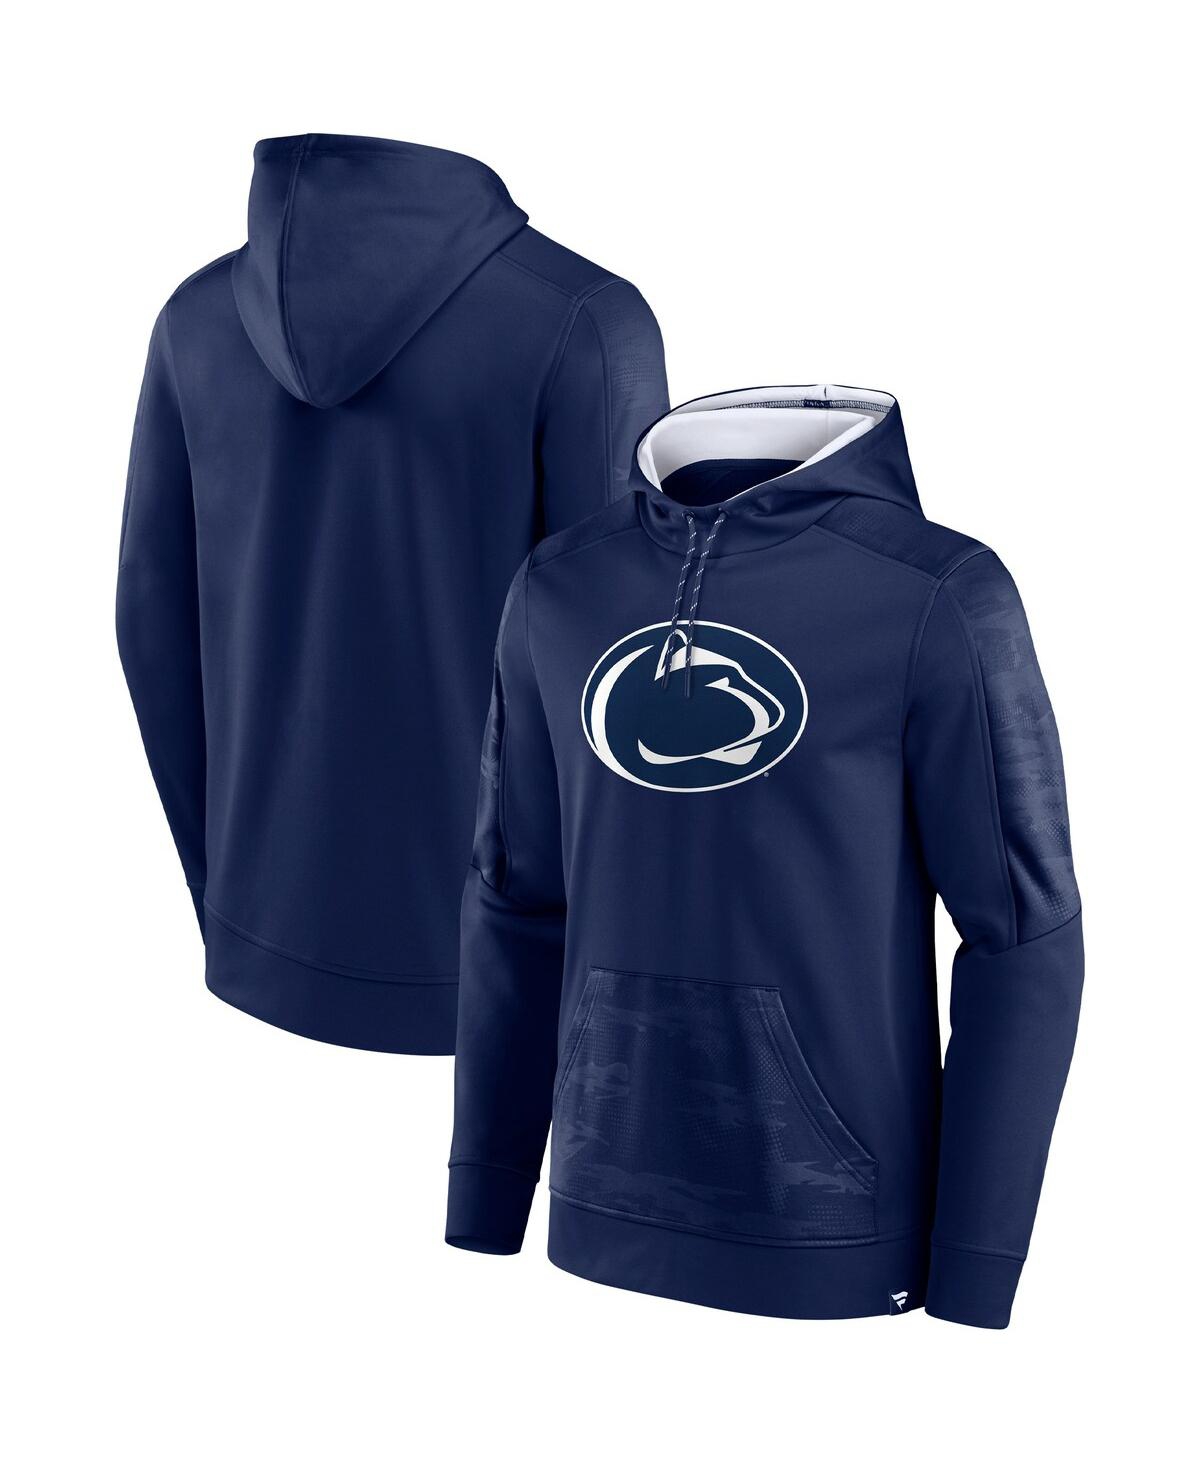 Fanatics Men's  Branded Heather Navy Penn State Nittany Lions Transitional Hoodie T-shirt